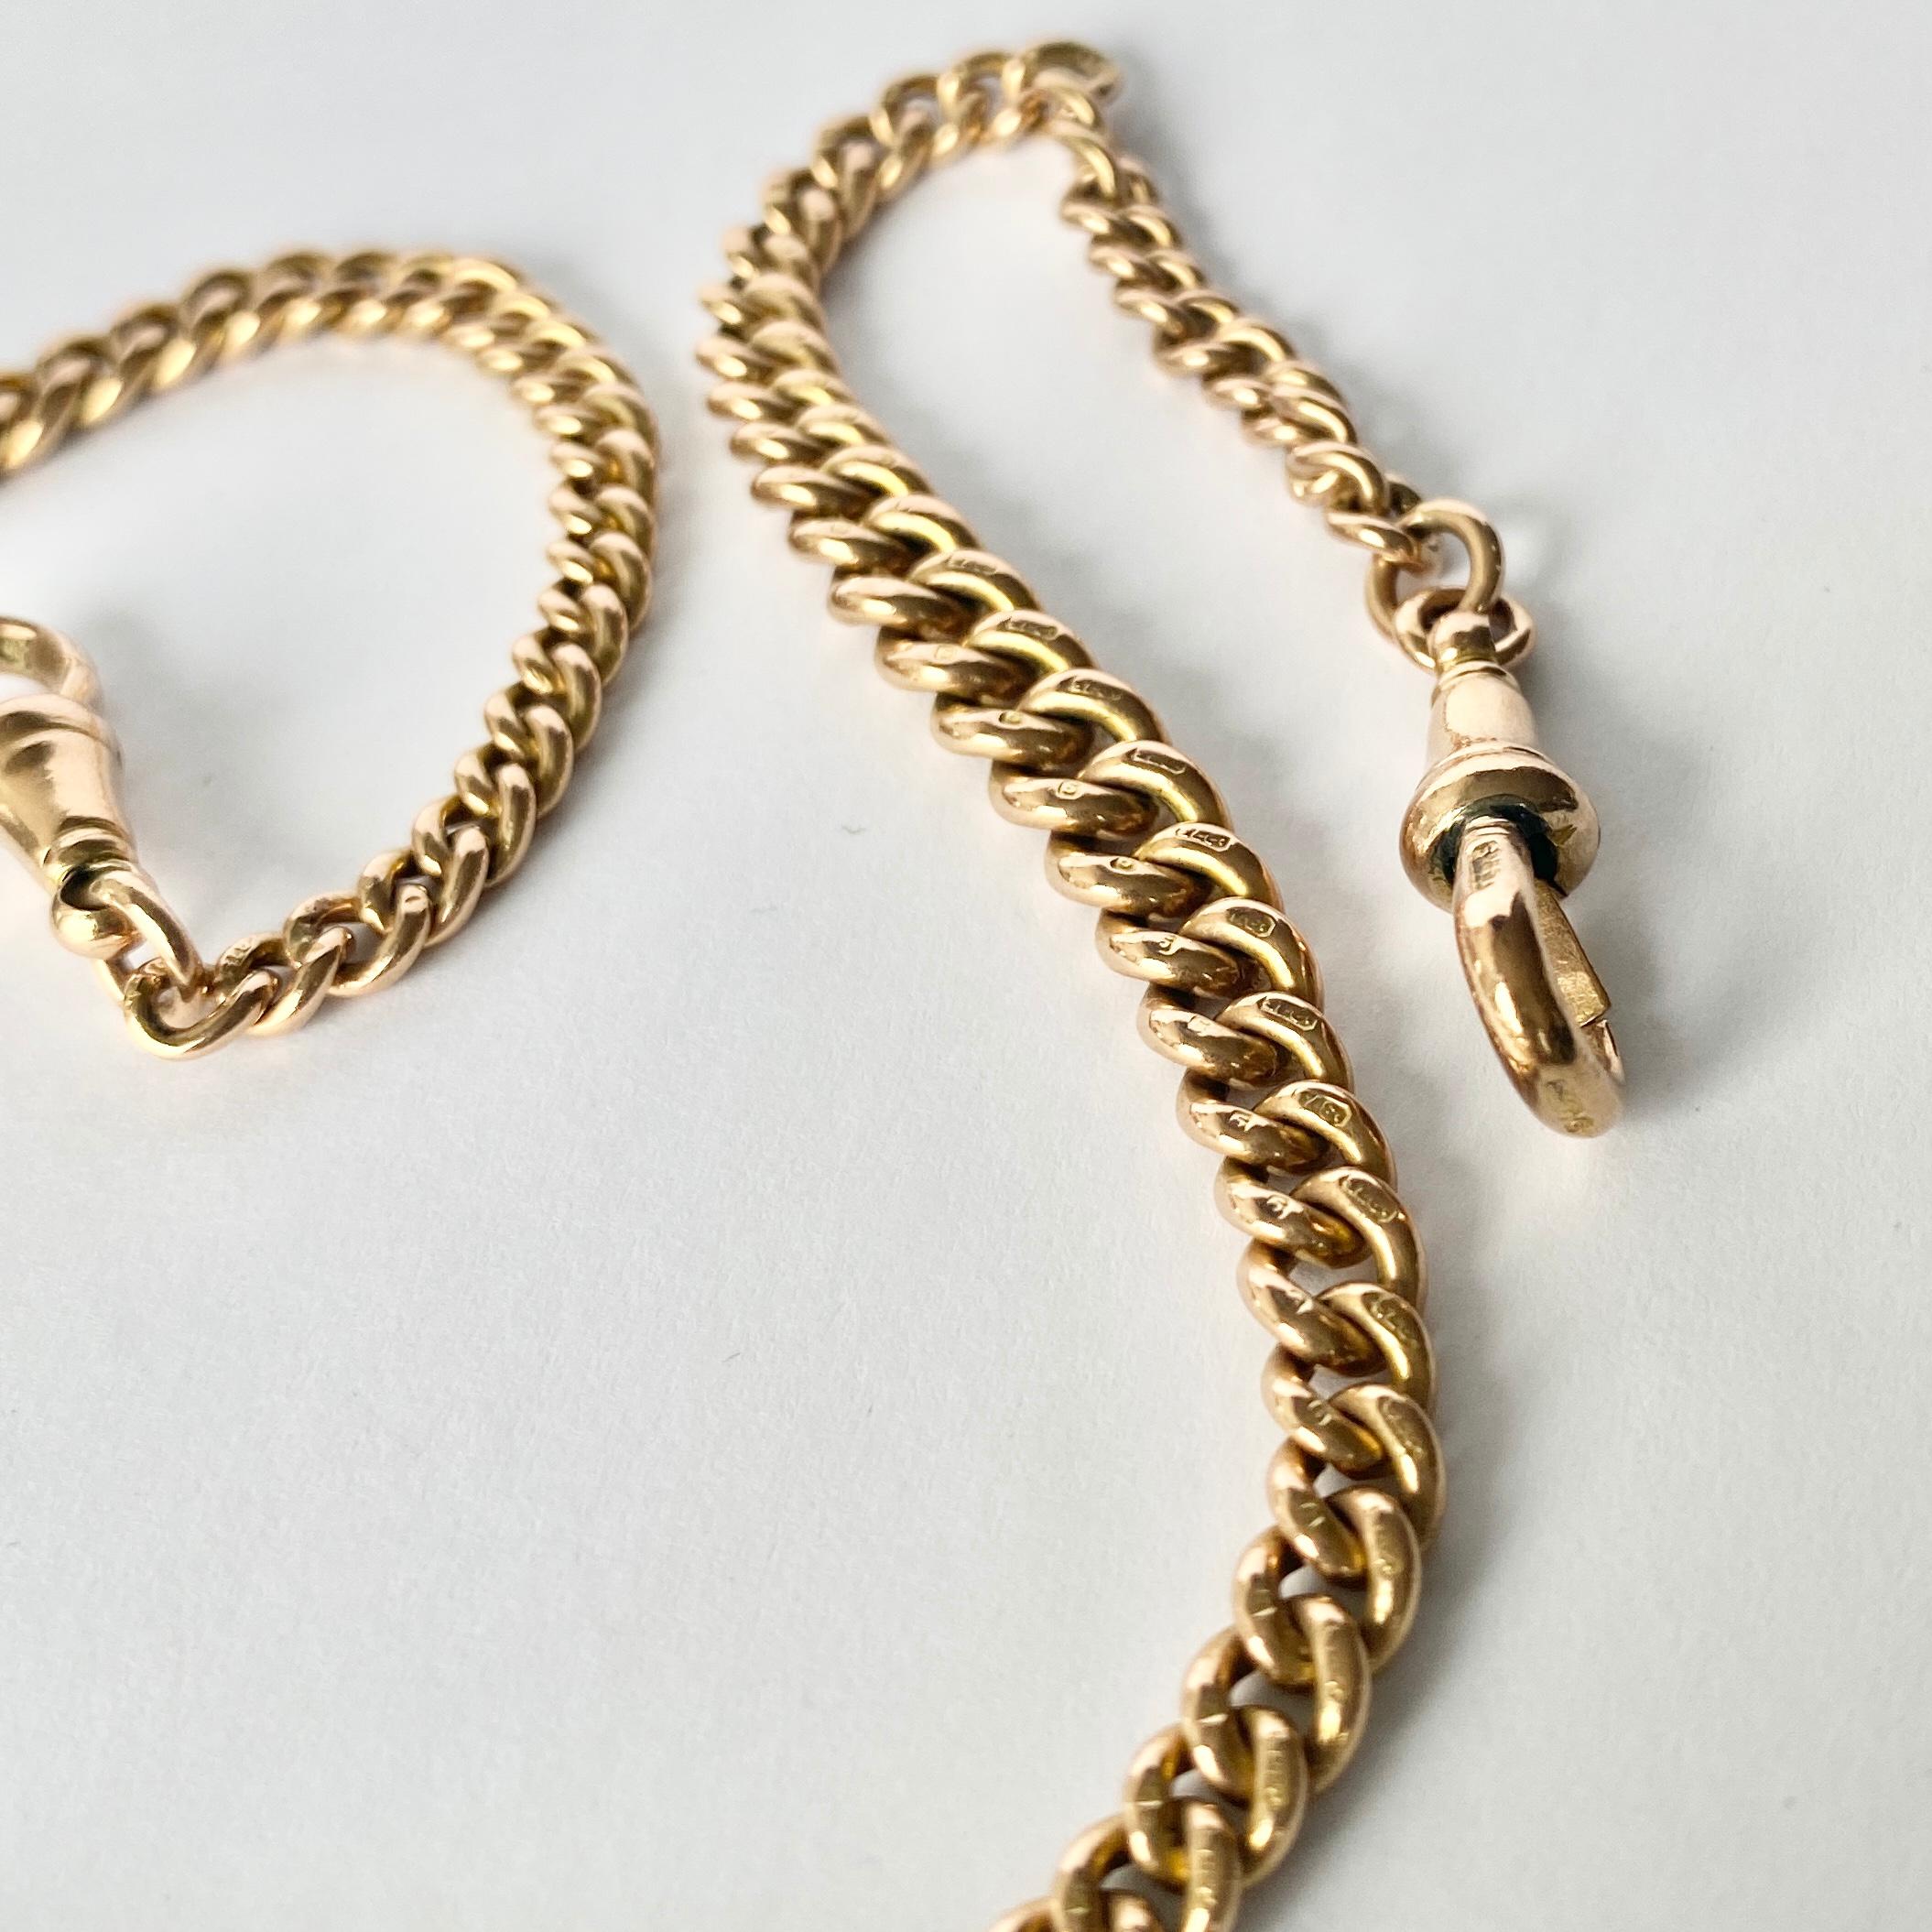 This albert is the perfect item for a gents wardrobe or could even be used as a necklace. The chain has a dog clip either end and at the centre there is a t-bar. Each link is hallmarked.

Length: 40cm 
Chain Width: 6.5-4.5m 

Weight: 34.7g
